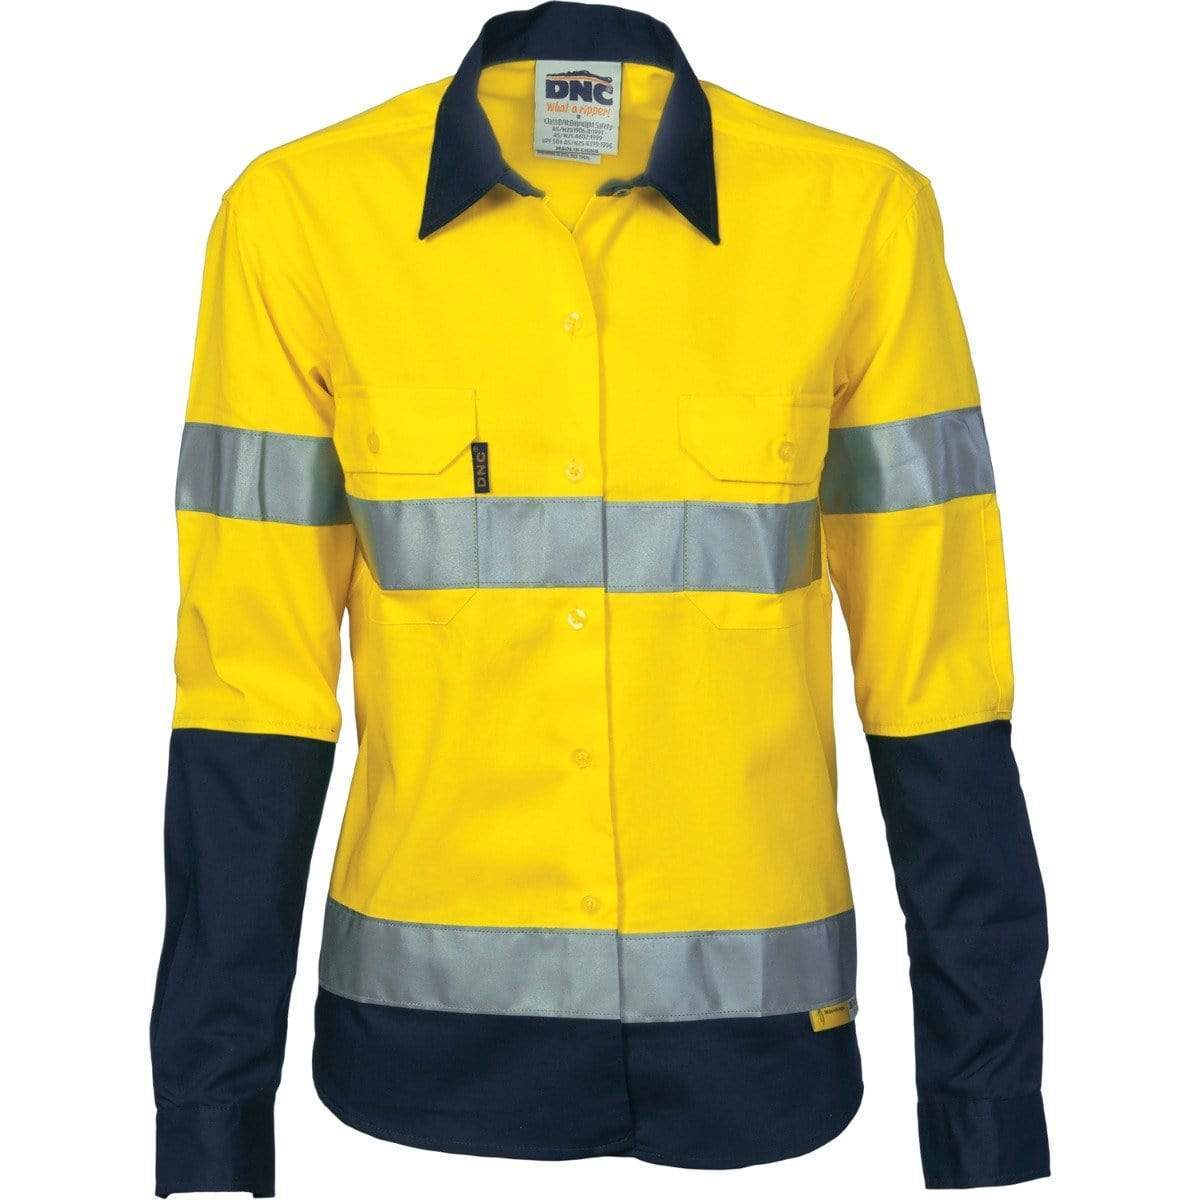 Dnc Workwear Women’s Hi-vis Two-tone Drill Long Sleeve Shirt With 3m Reflective Tape - 3936 Work Wear DNC Workwear Yellow/Navy 8 